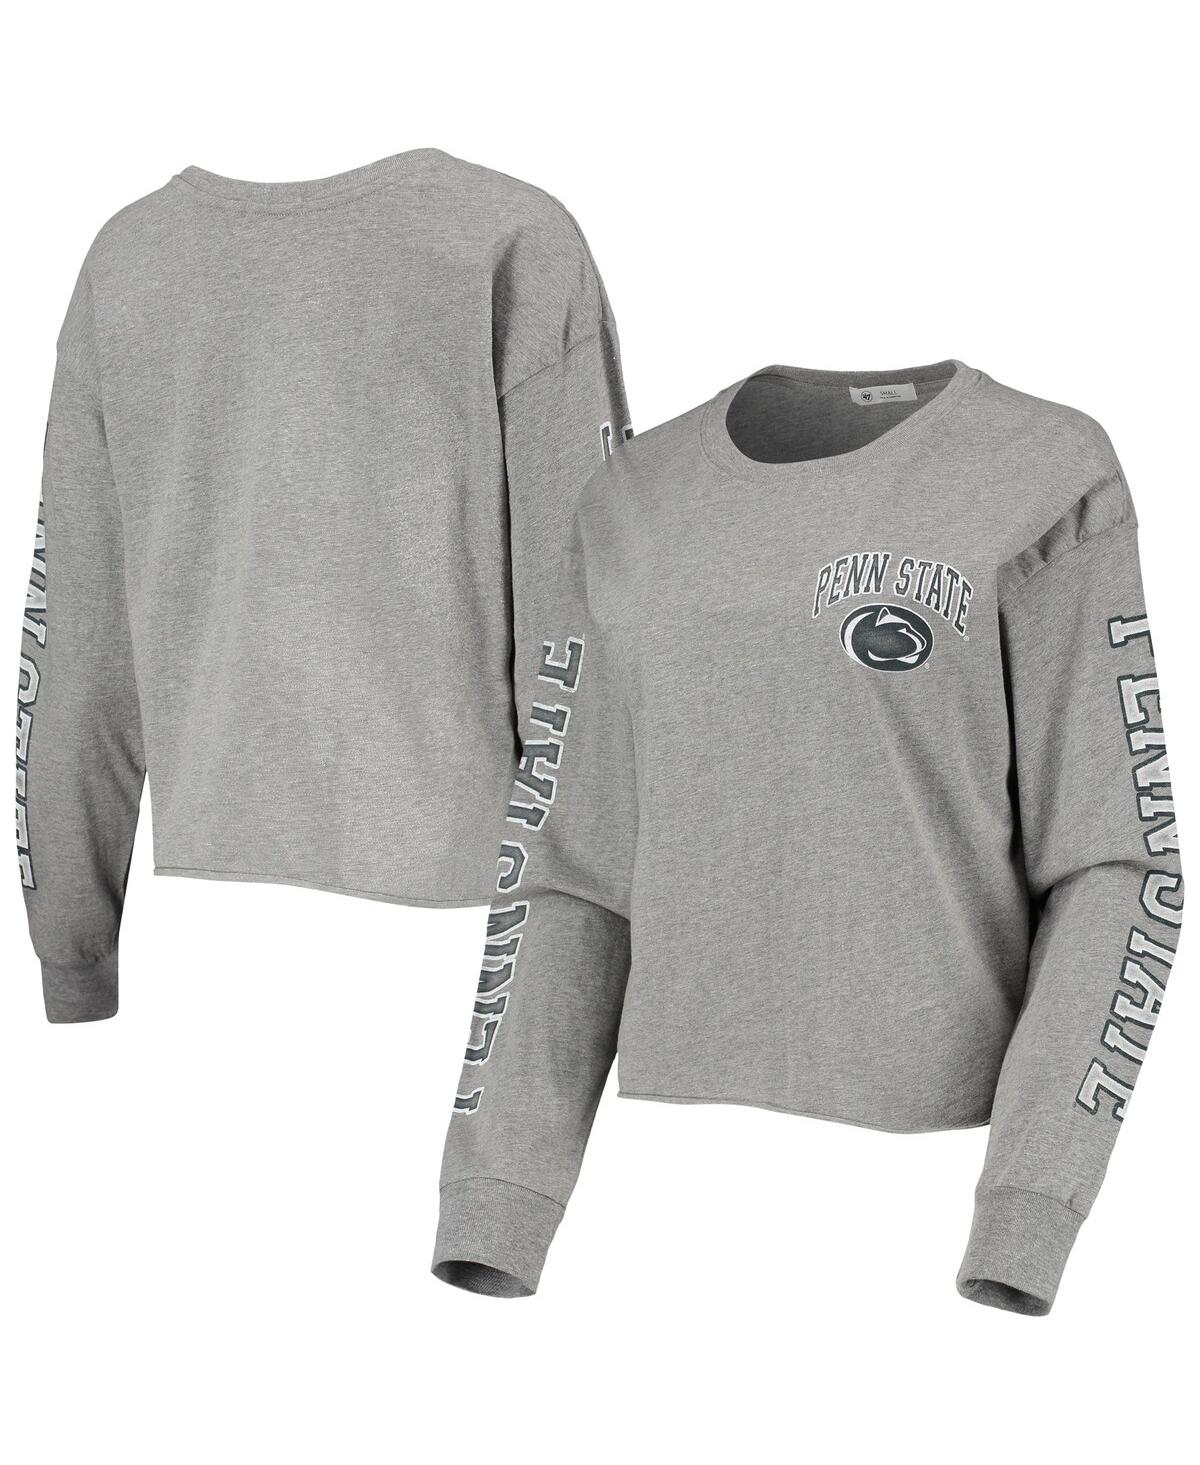 Women's '47 Heathered Gray Penn State Nittany Lions Ultra Max Parkway Long Sleeve Cropped T-shirt - Heathered Gray